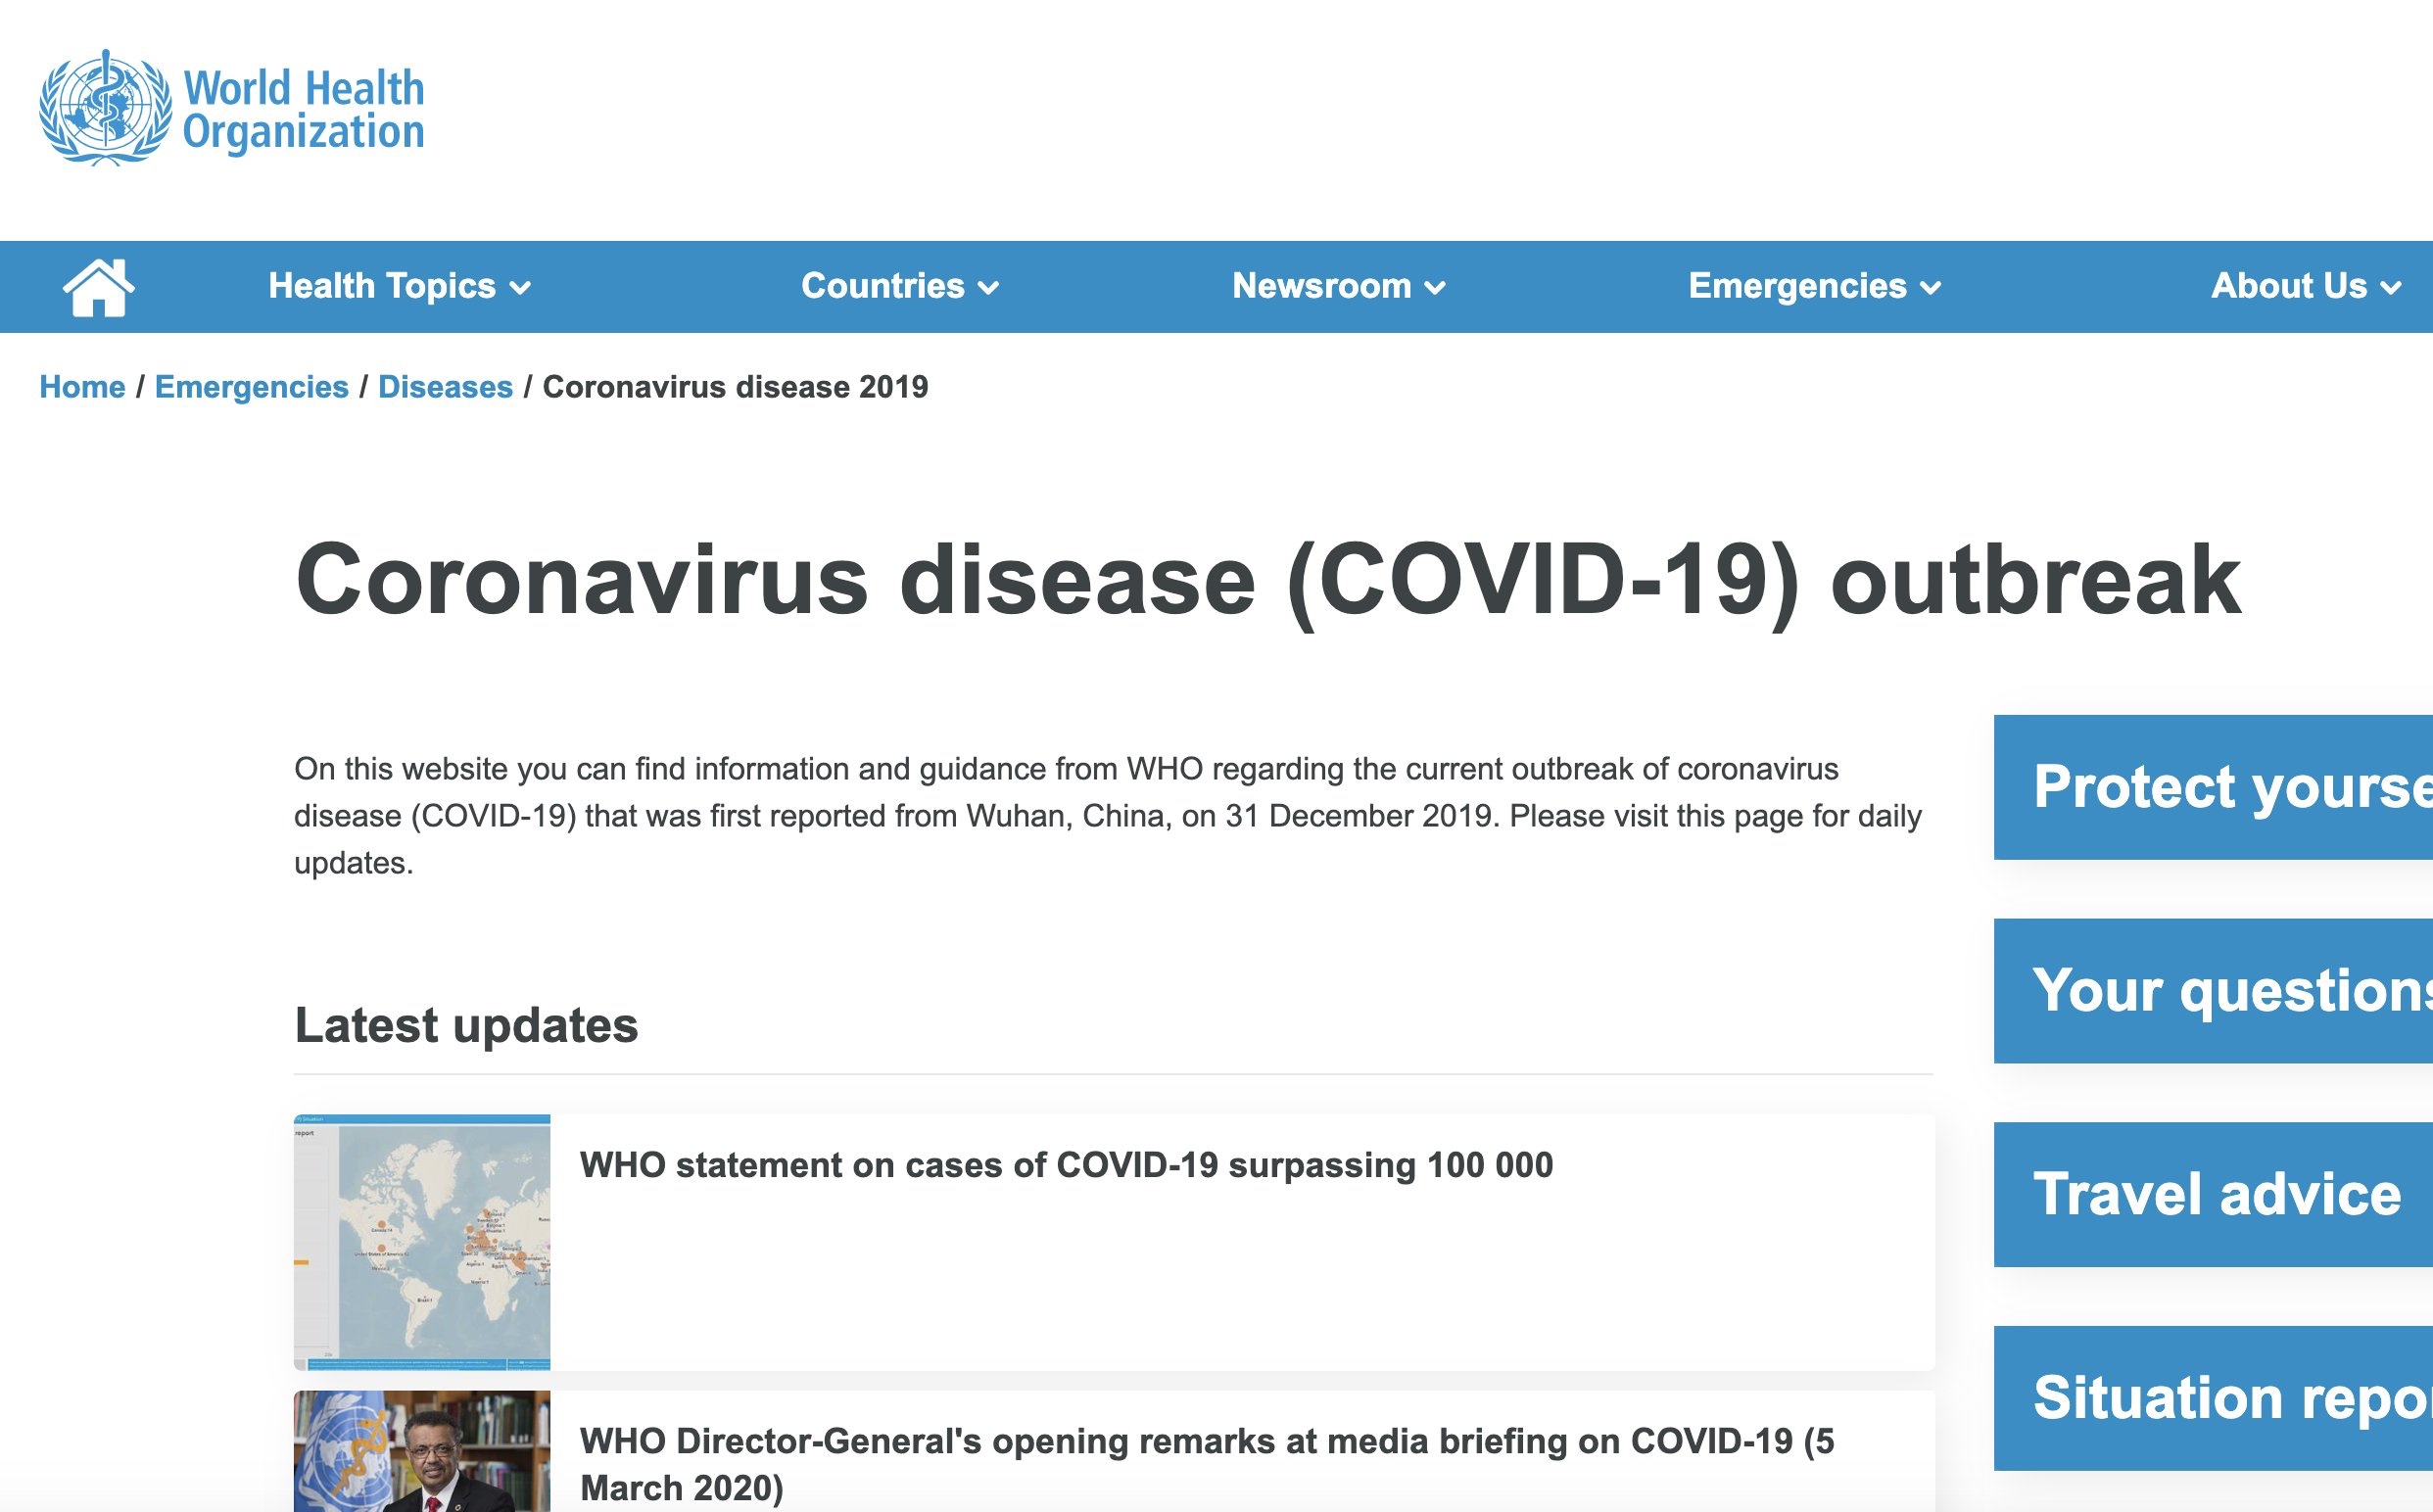 These YouTube desktop notifications direct US users to a WHO page about the coronavirus